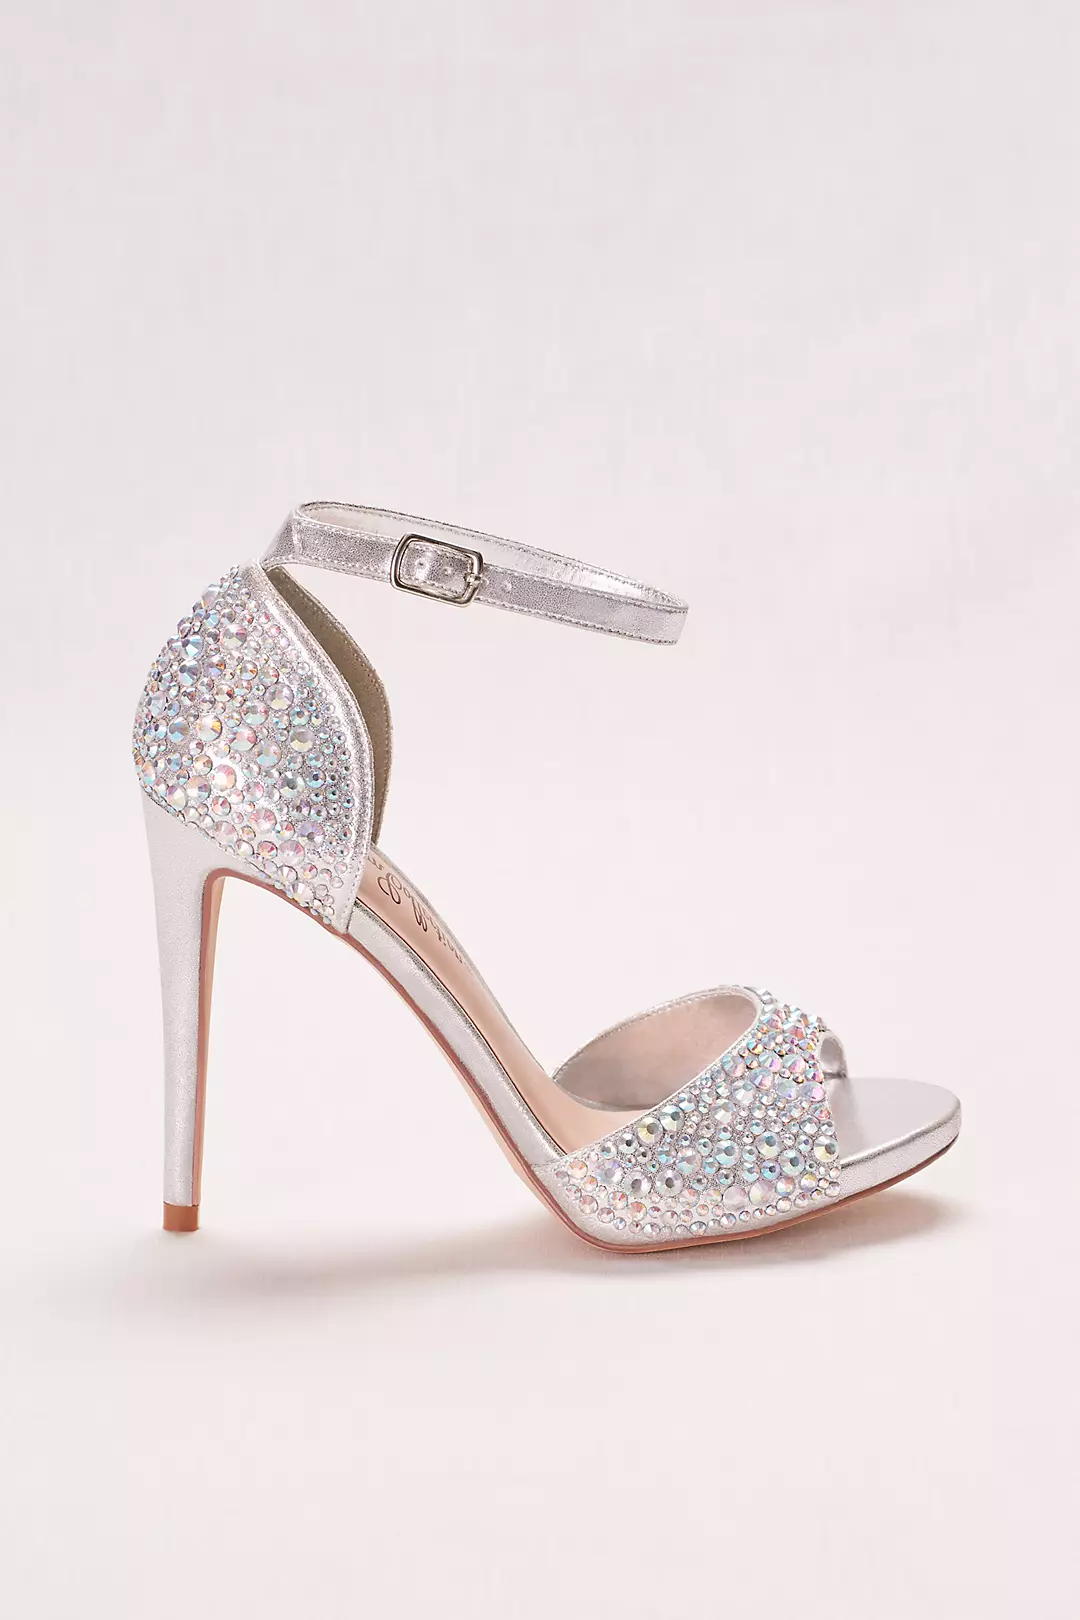 Crystal Peep Toe High Heel with Ankle Strap Image 3